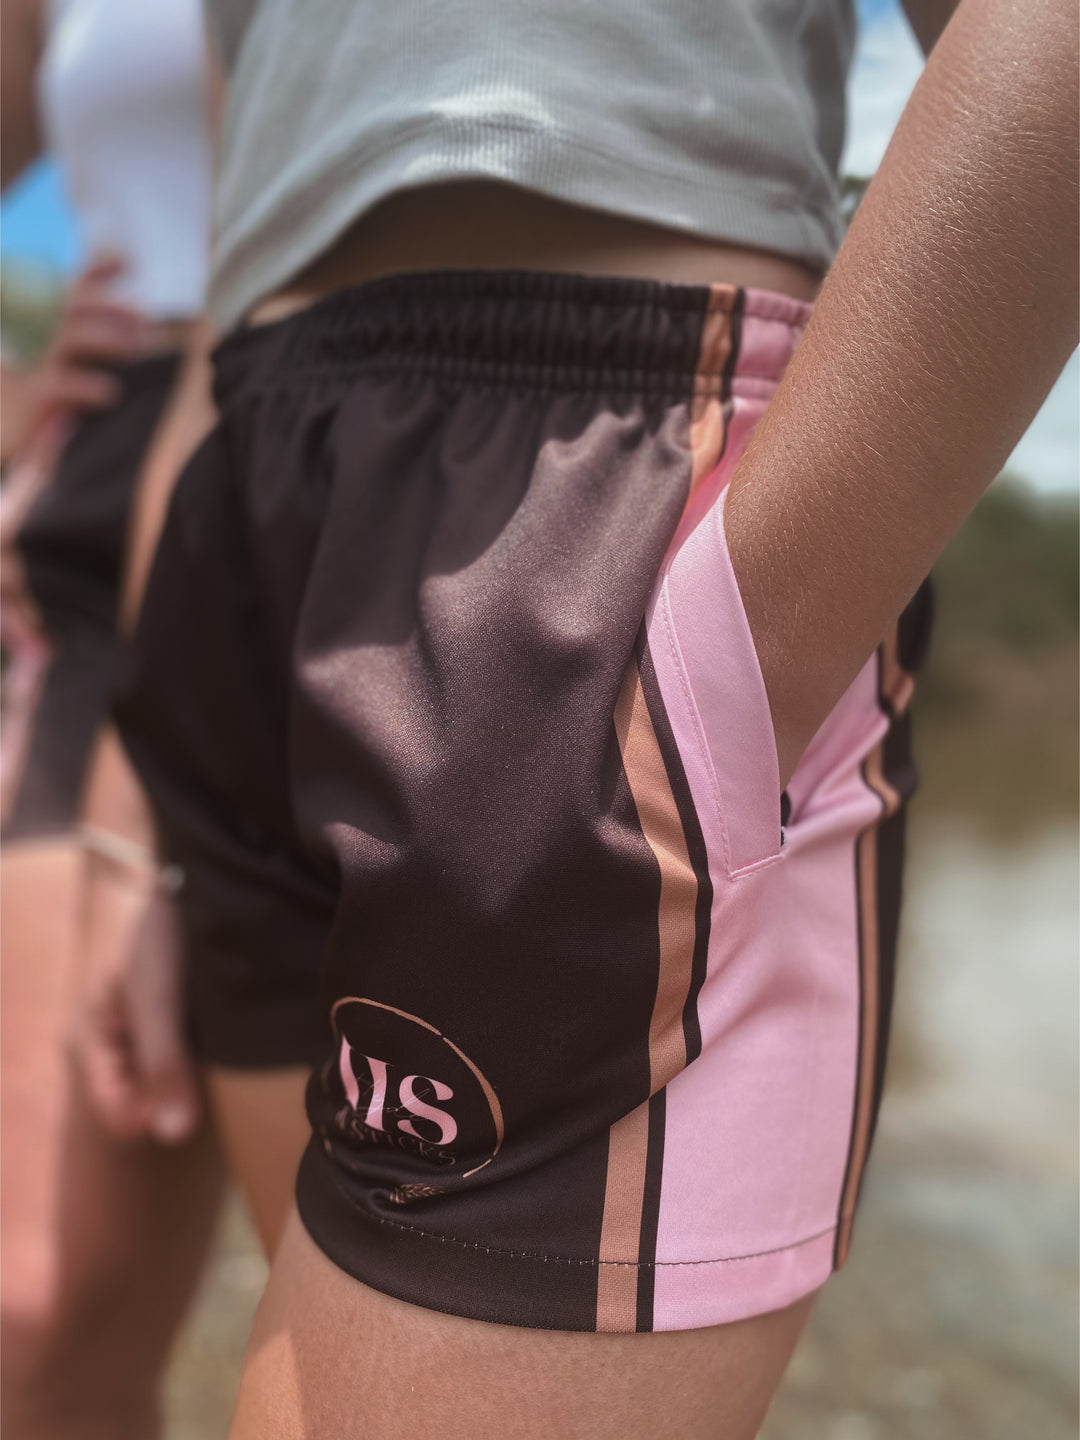 H&S Out in the Sticks Rugby Shorts - Barbie